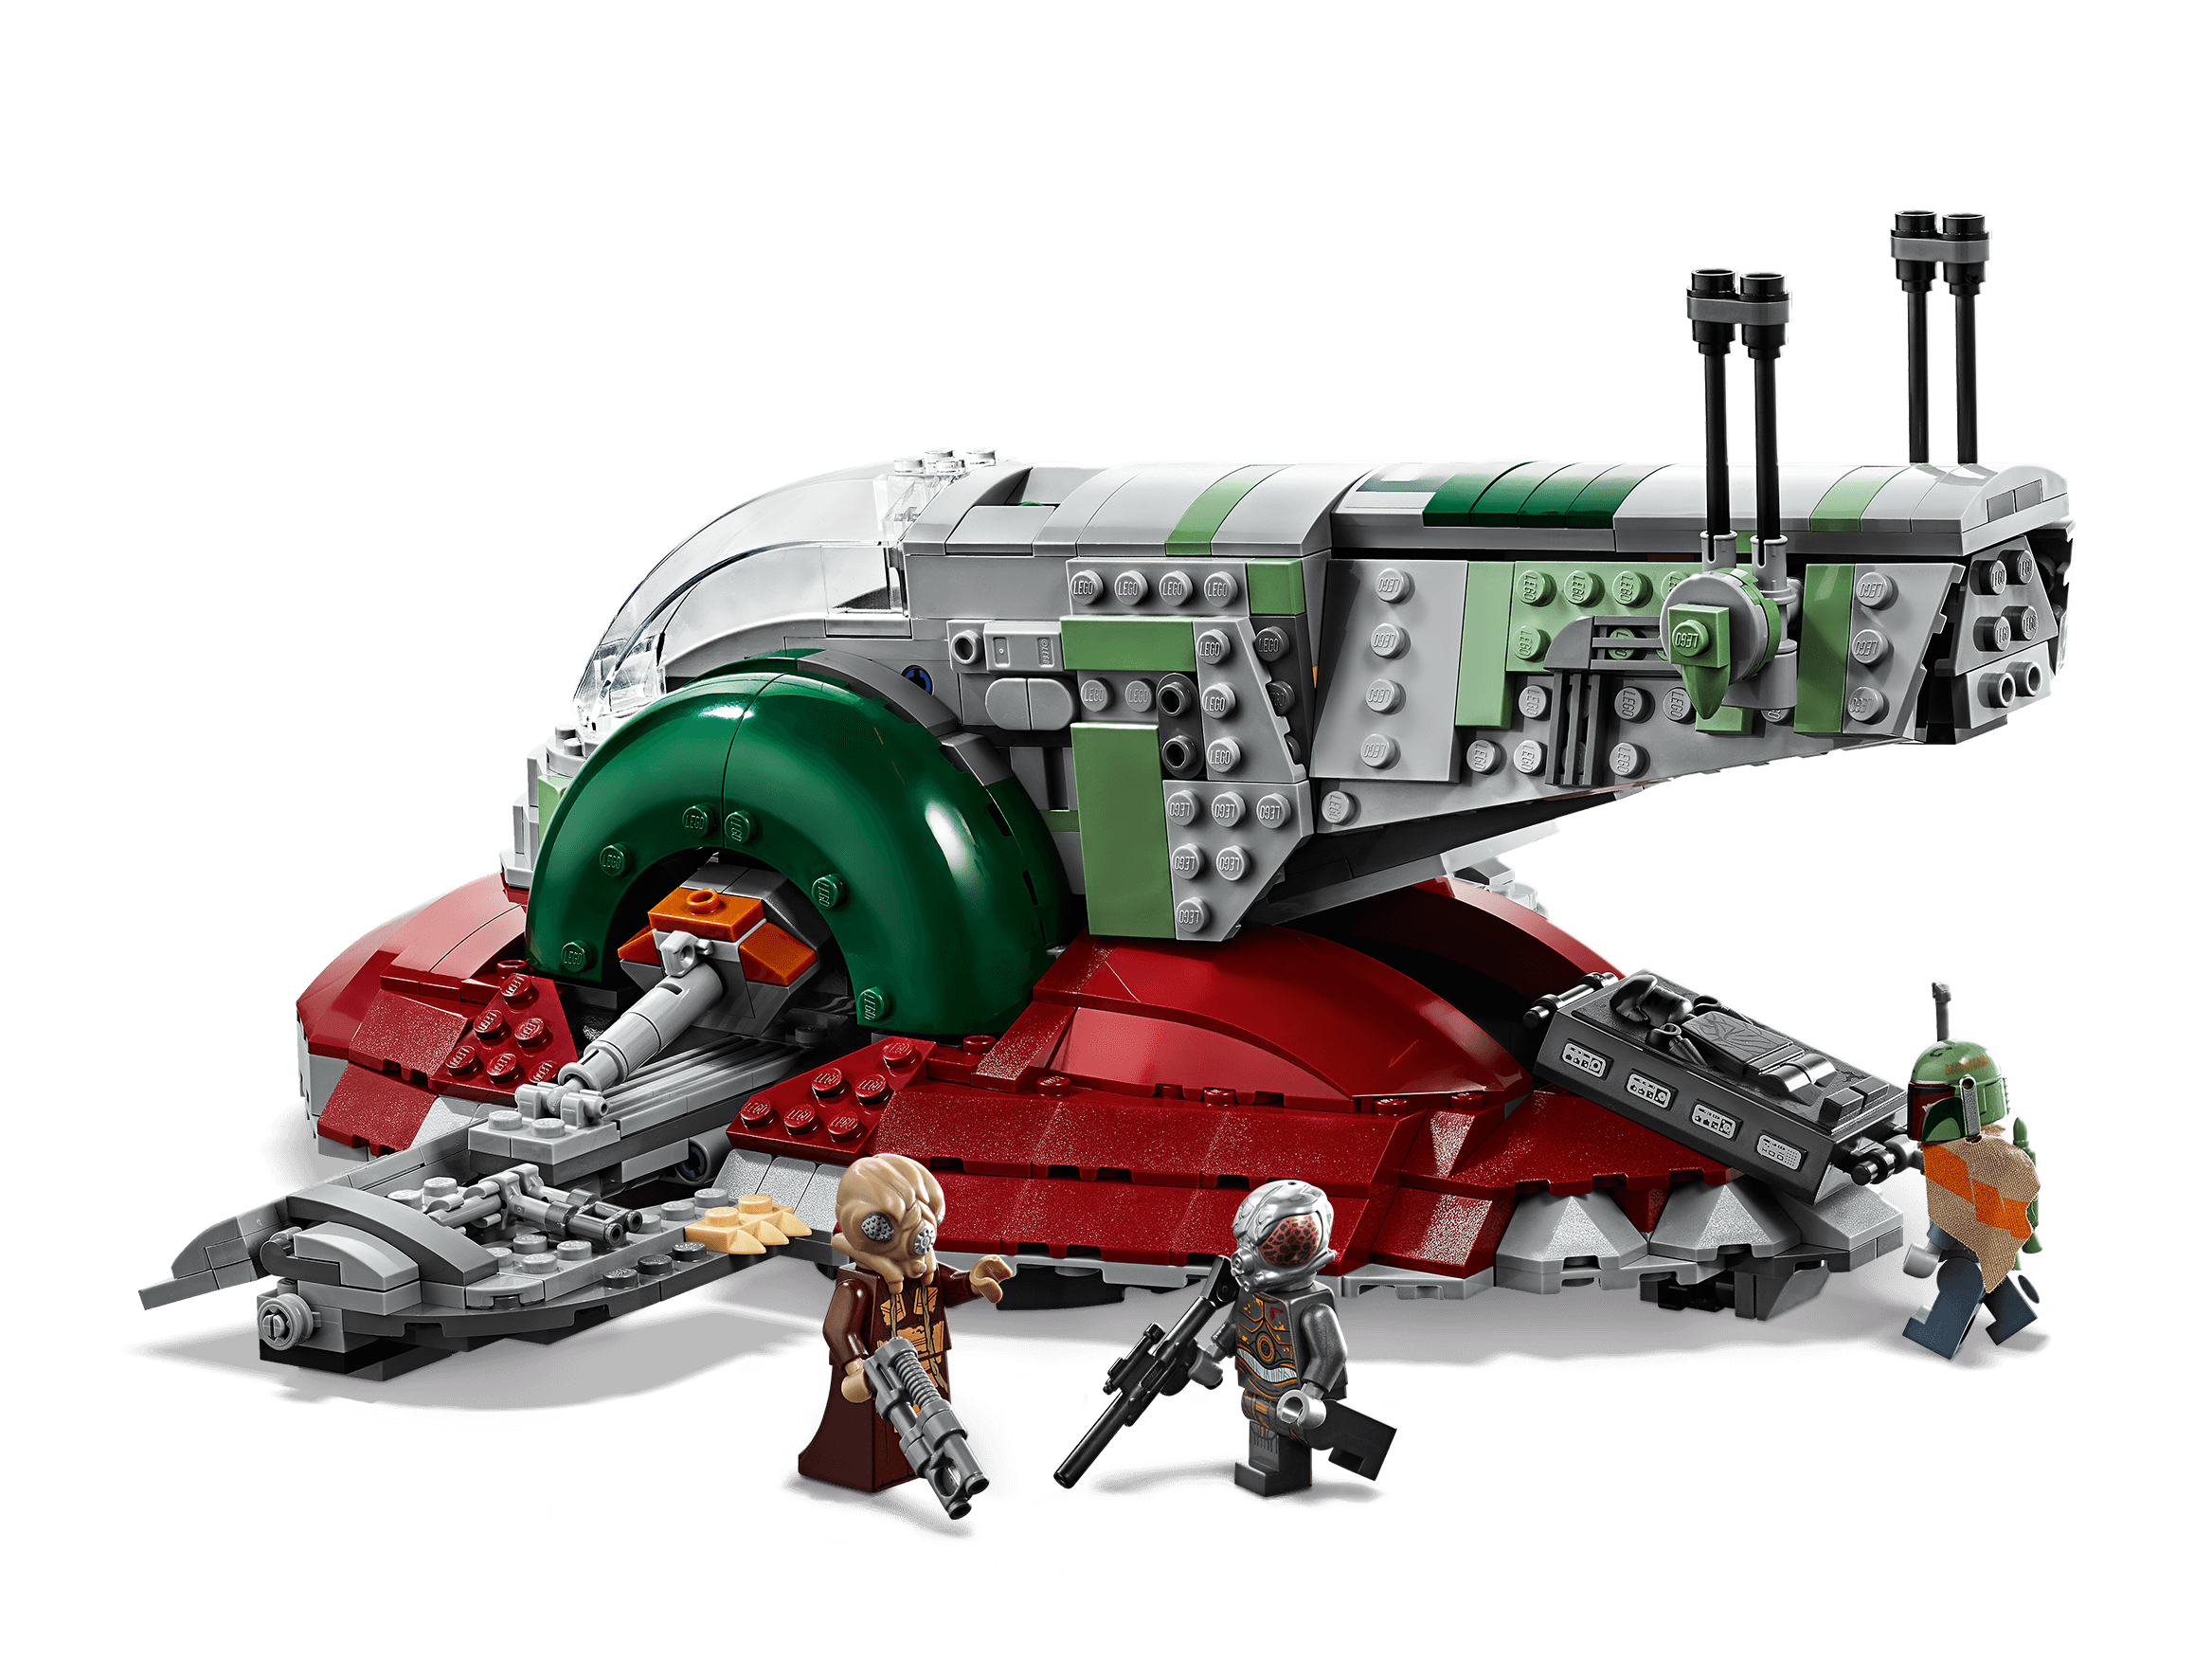 20th Anniversary Collector Edition 1,007 Pieces Holiday Gift for Adults LEGO Star Wars Slave l Star Wars Empire Strikes Back Collectible Starship Model 75243 Building Kit 